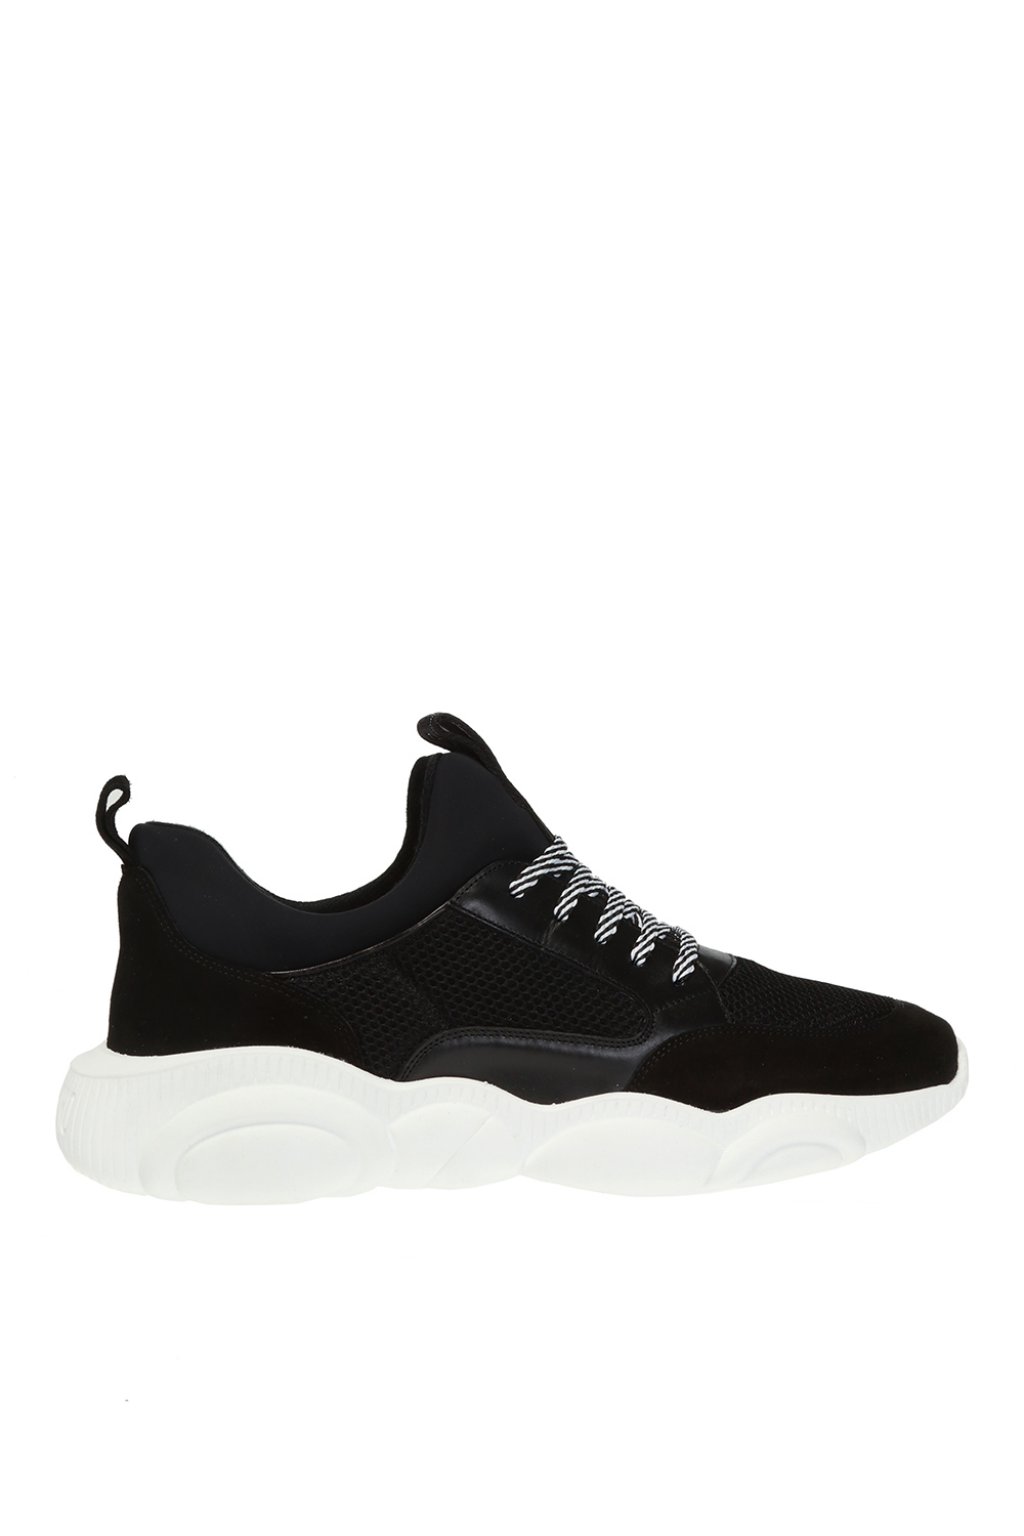 moschino teddy shoes sneakers